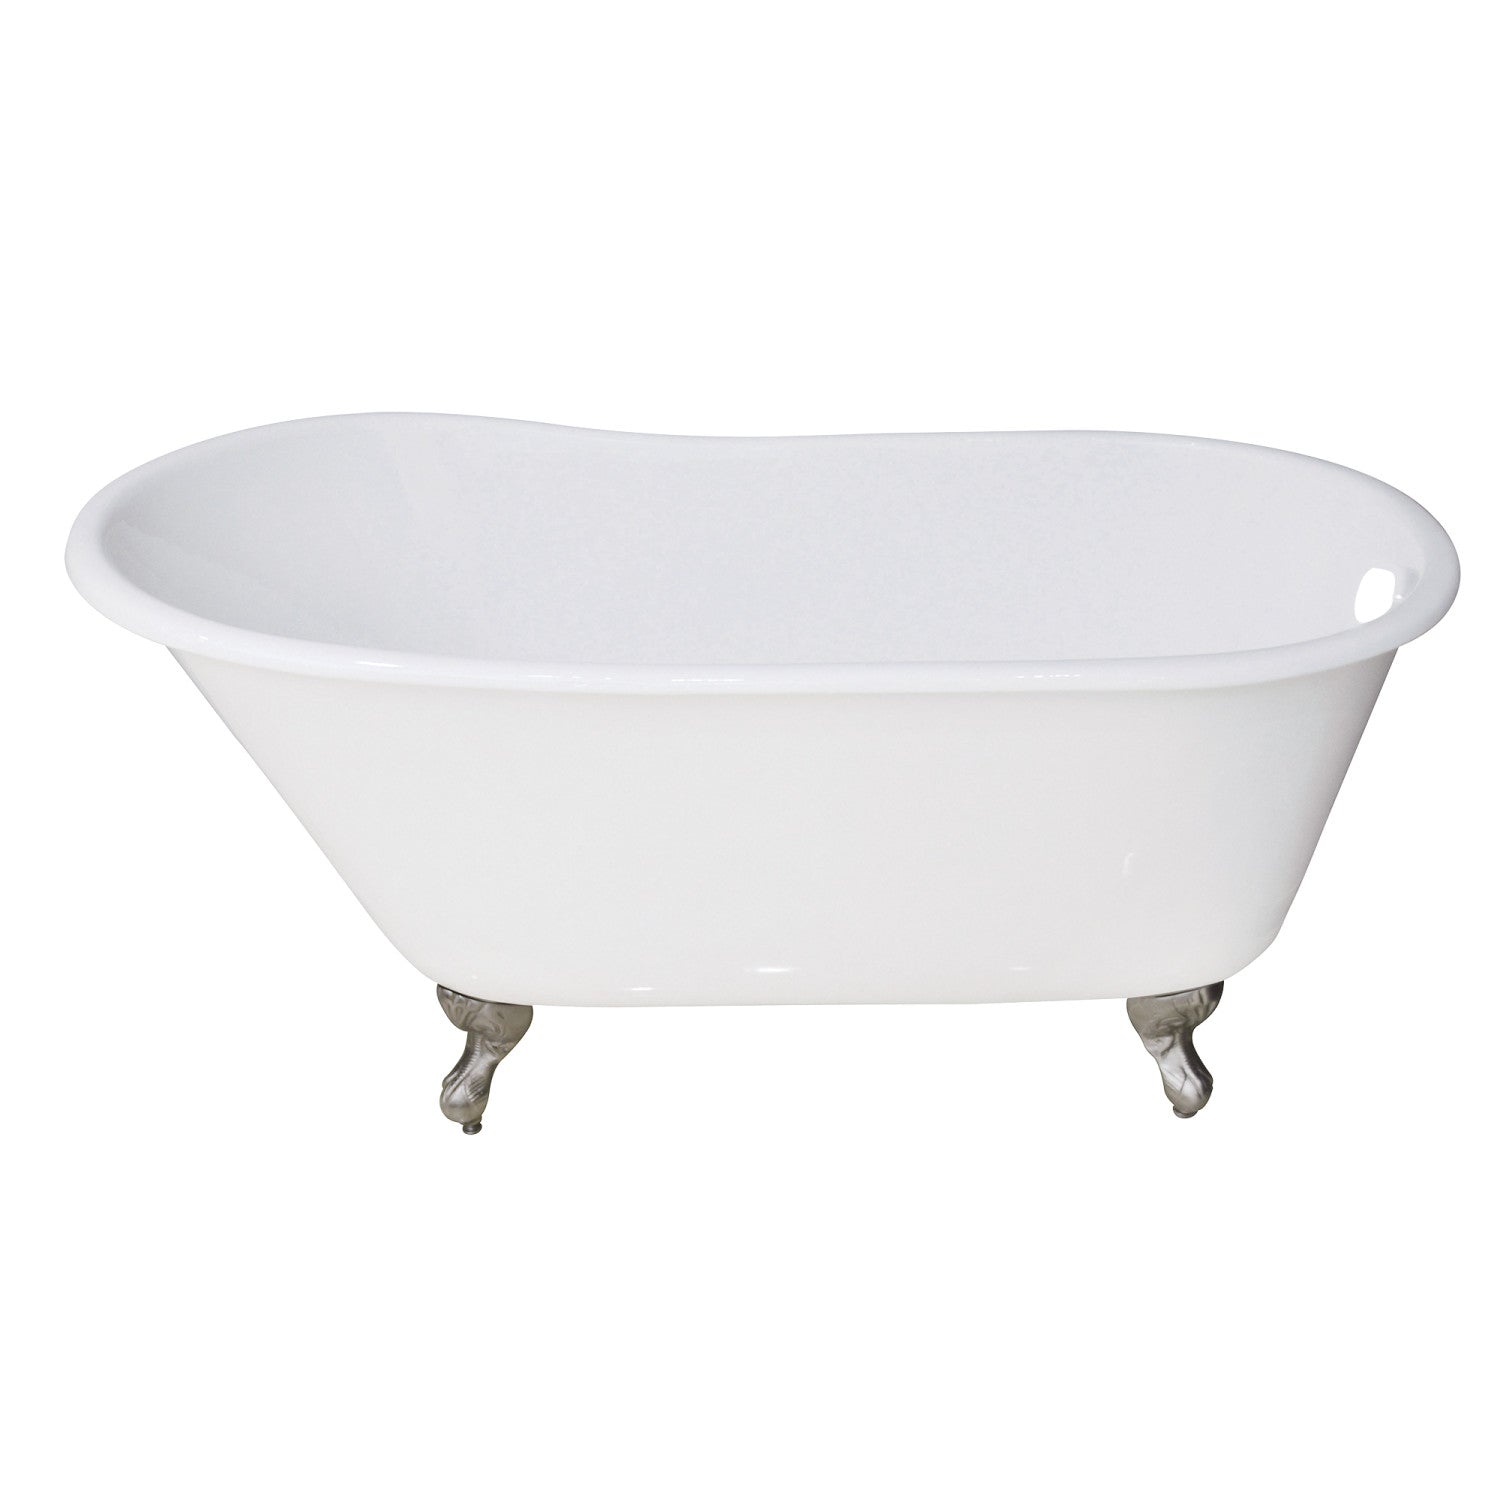 Aqua Eden VCTND5328NT1 53-Inch Cast Iron Single Slipper Clawfoot Tub (No  Faucet Drillings), White/Polished Chrome